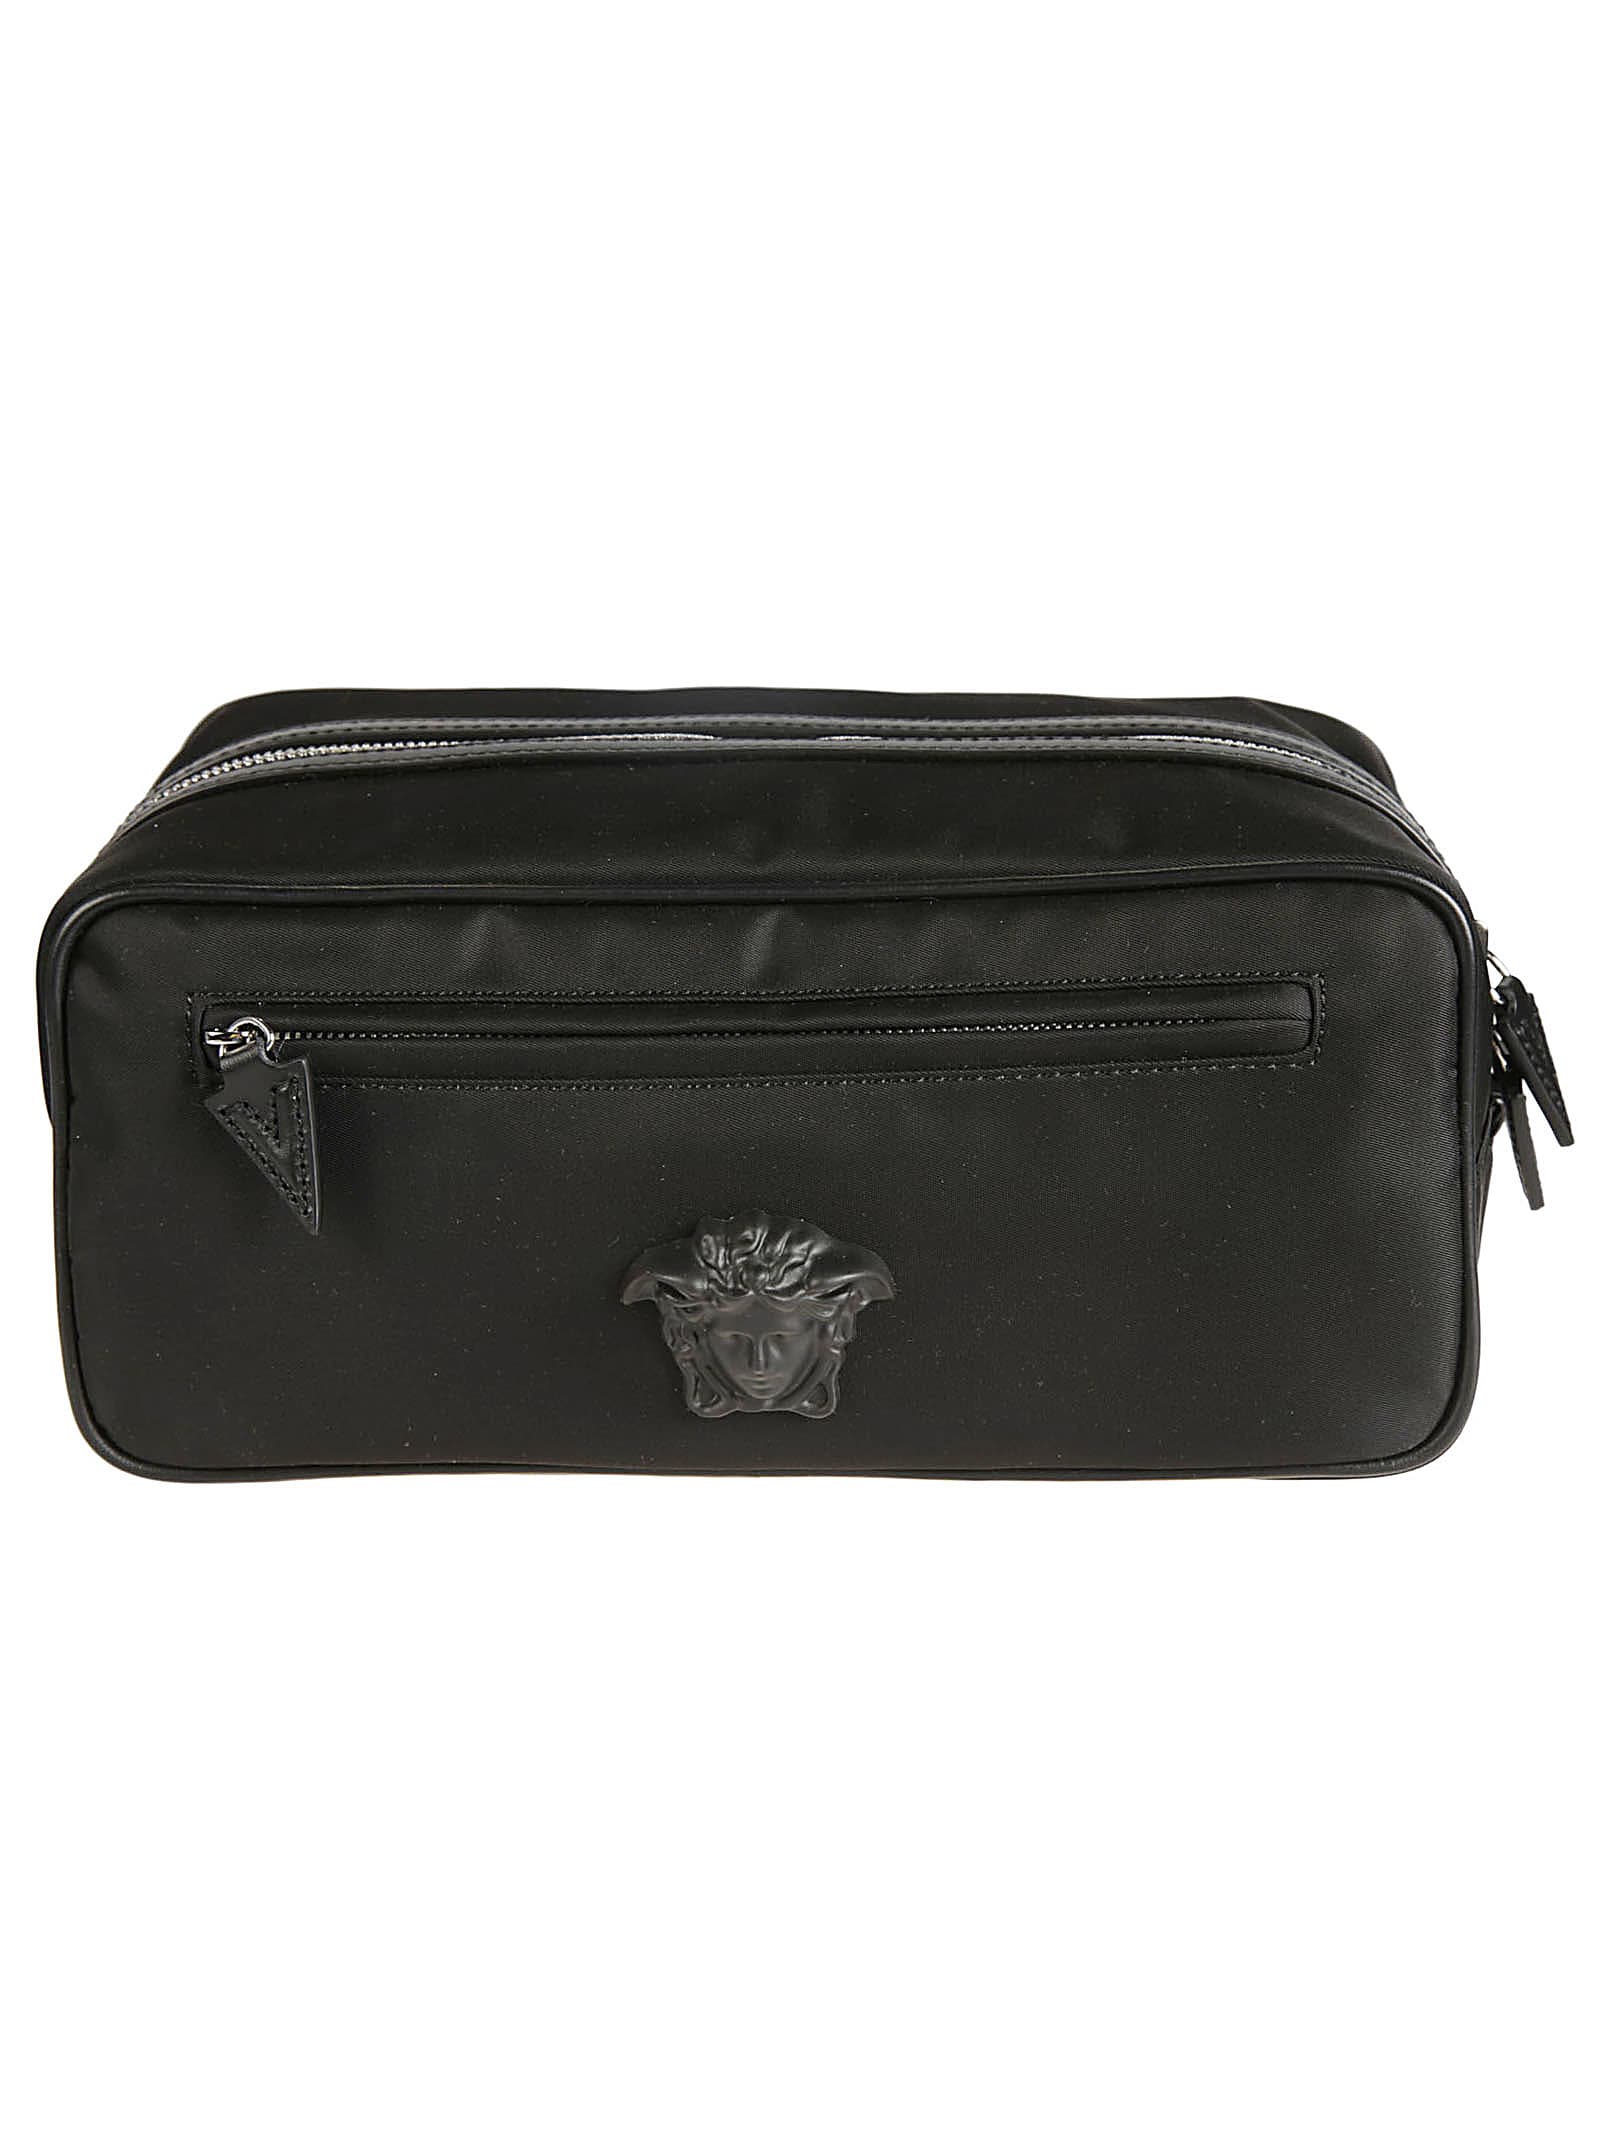 Versace Embossed Medusa Head Pouch